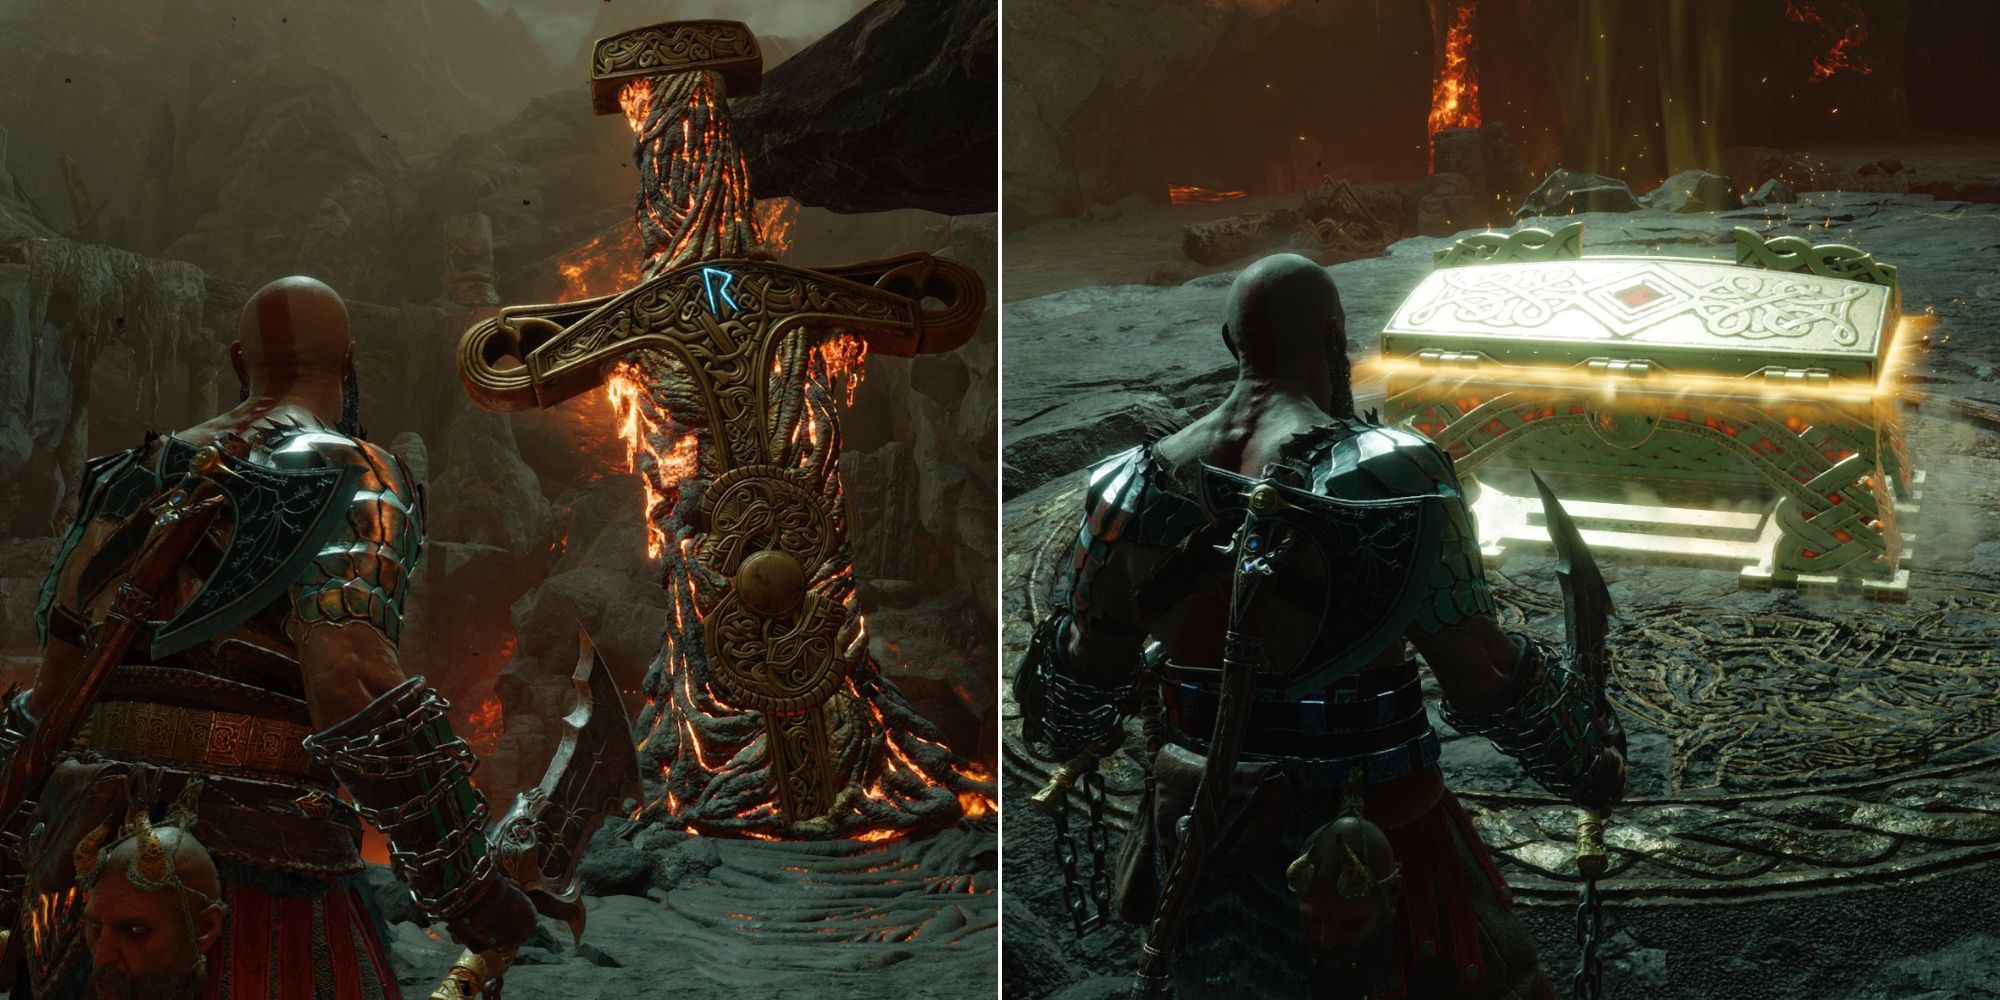 Split image of Kratos in Muspelheim. The left photo is Kratos standing next to a fiery sword you interact with to begin a trial, The right photo is Kratos standing next to a legendary chest earned from completing a trial.